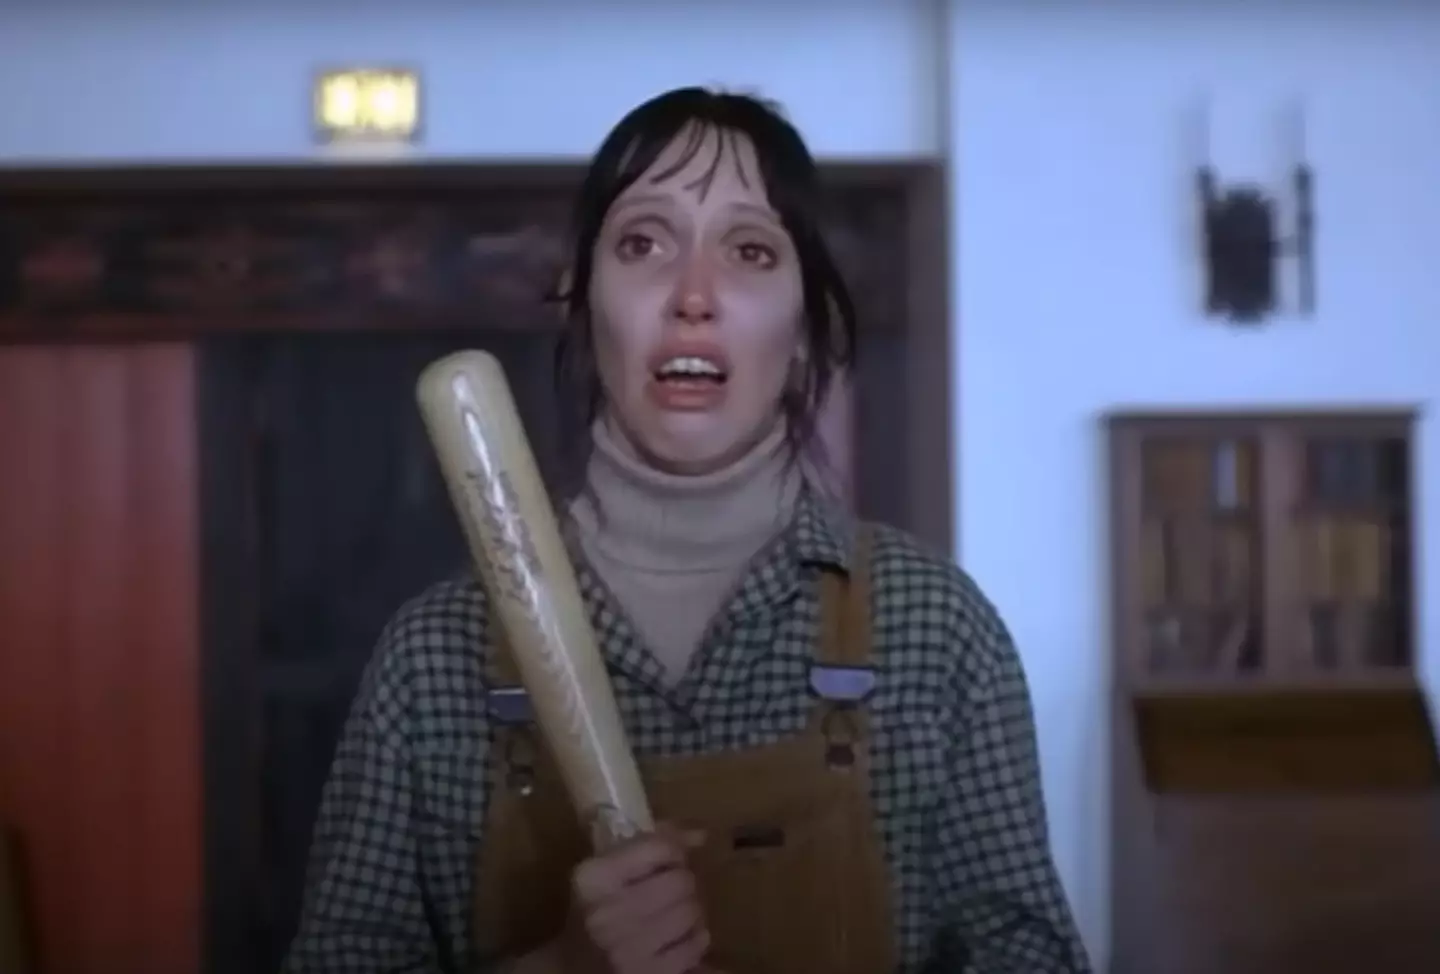 Shelley Duvall is best known for her role in The Shining.